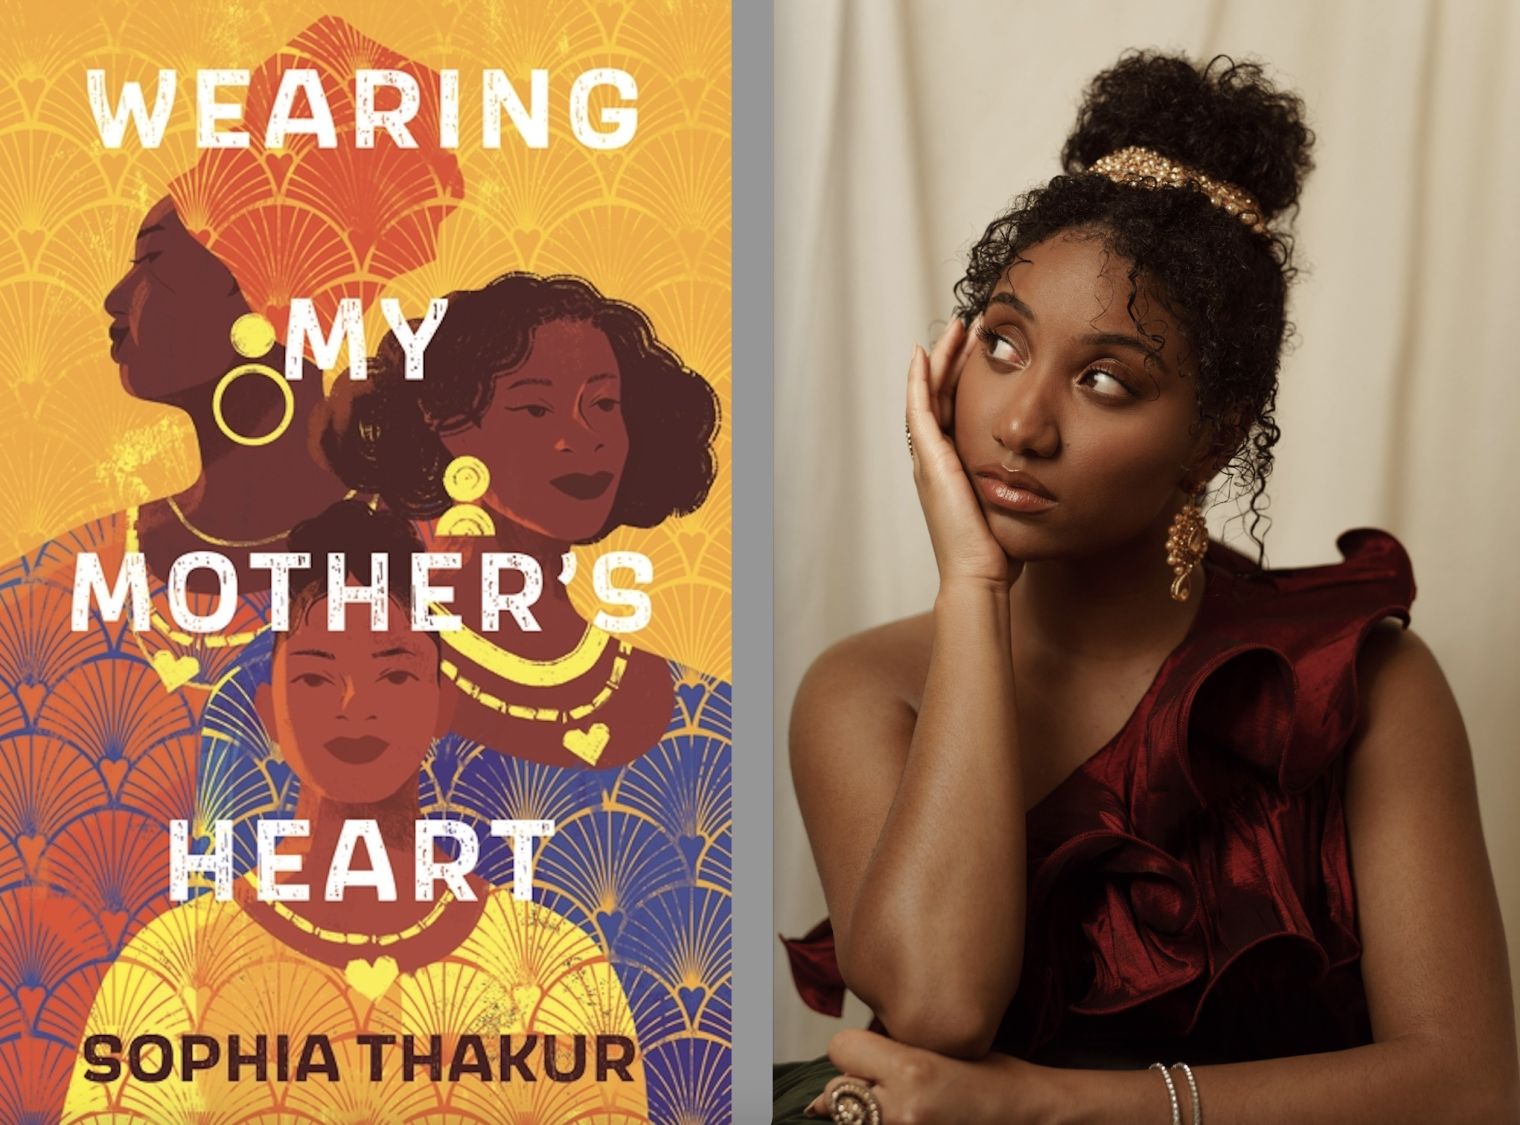 Sophia Thakur’s new book ‘Wearing My Mother’s Heart’ is out today